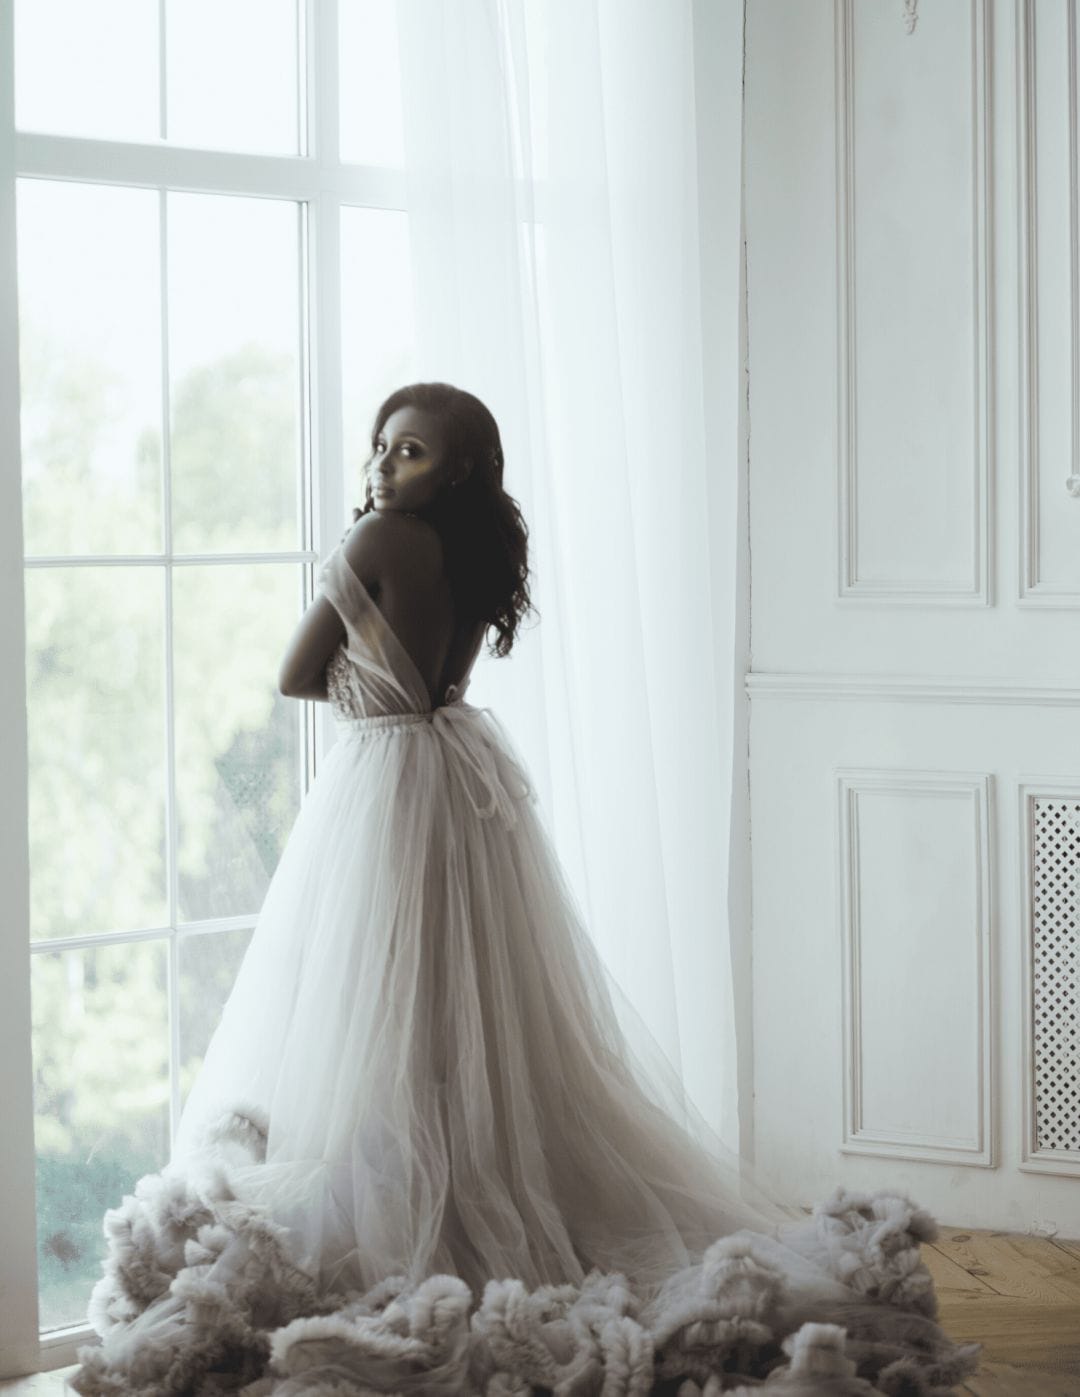 An African-American bride in her couture wedding dress looking over her shoulder while standing in front of a floor to ceiling window. The dress has lots of flowing tulle and ruffles.